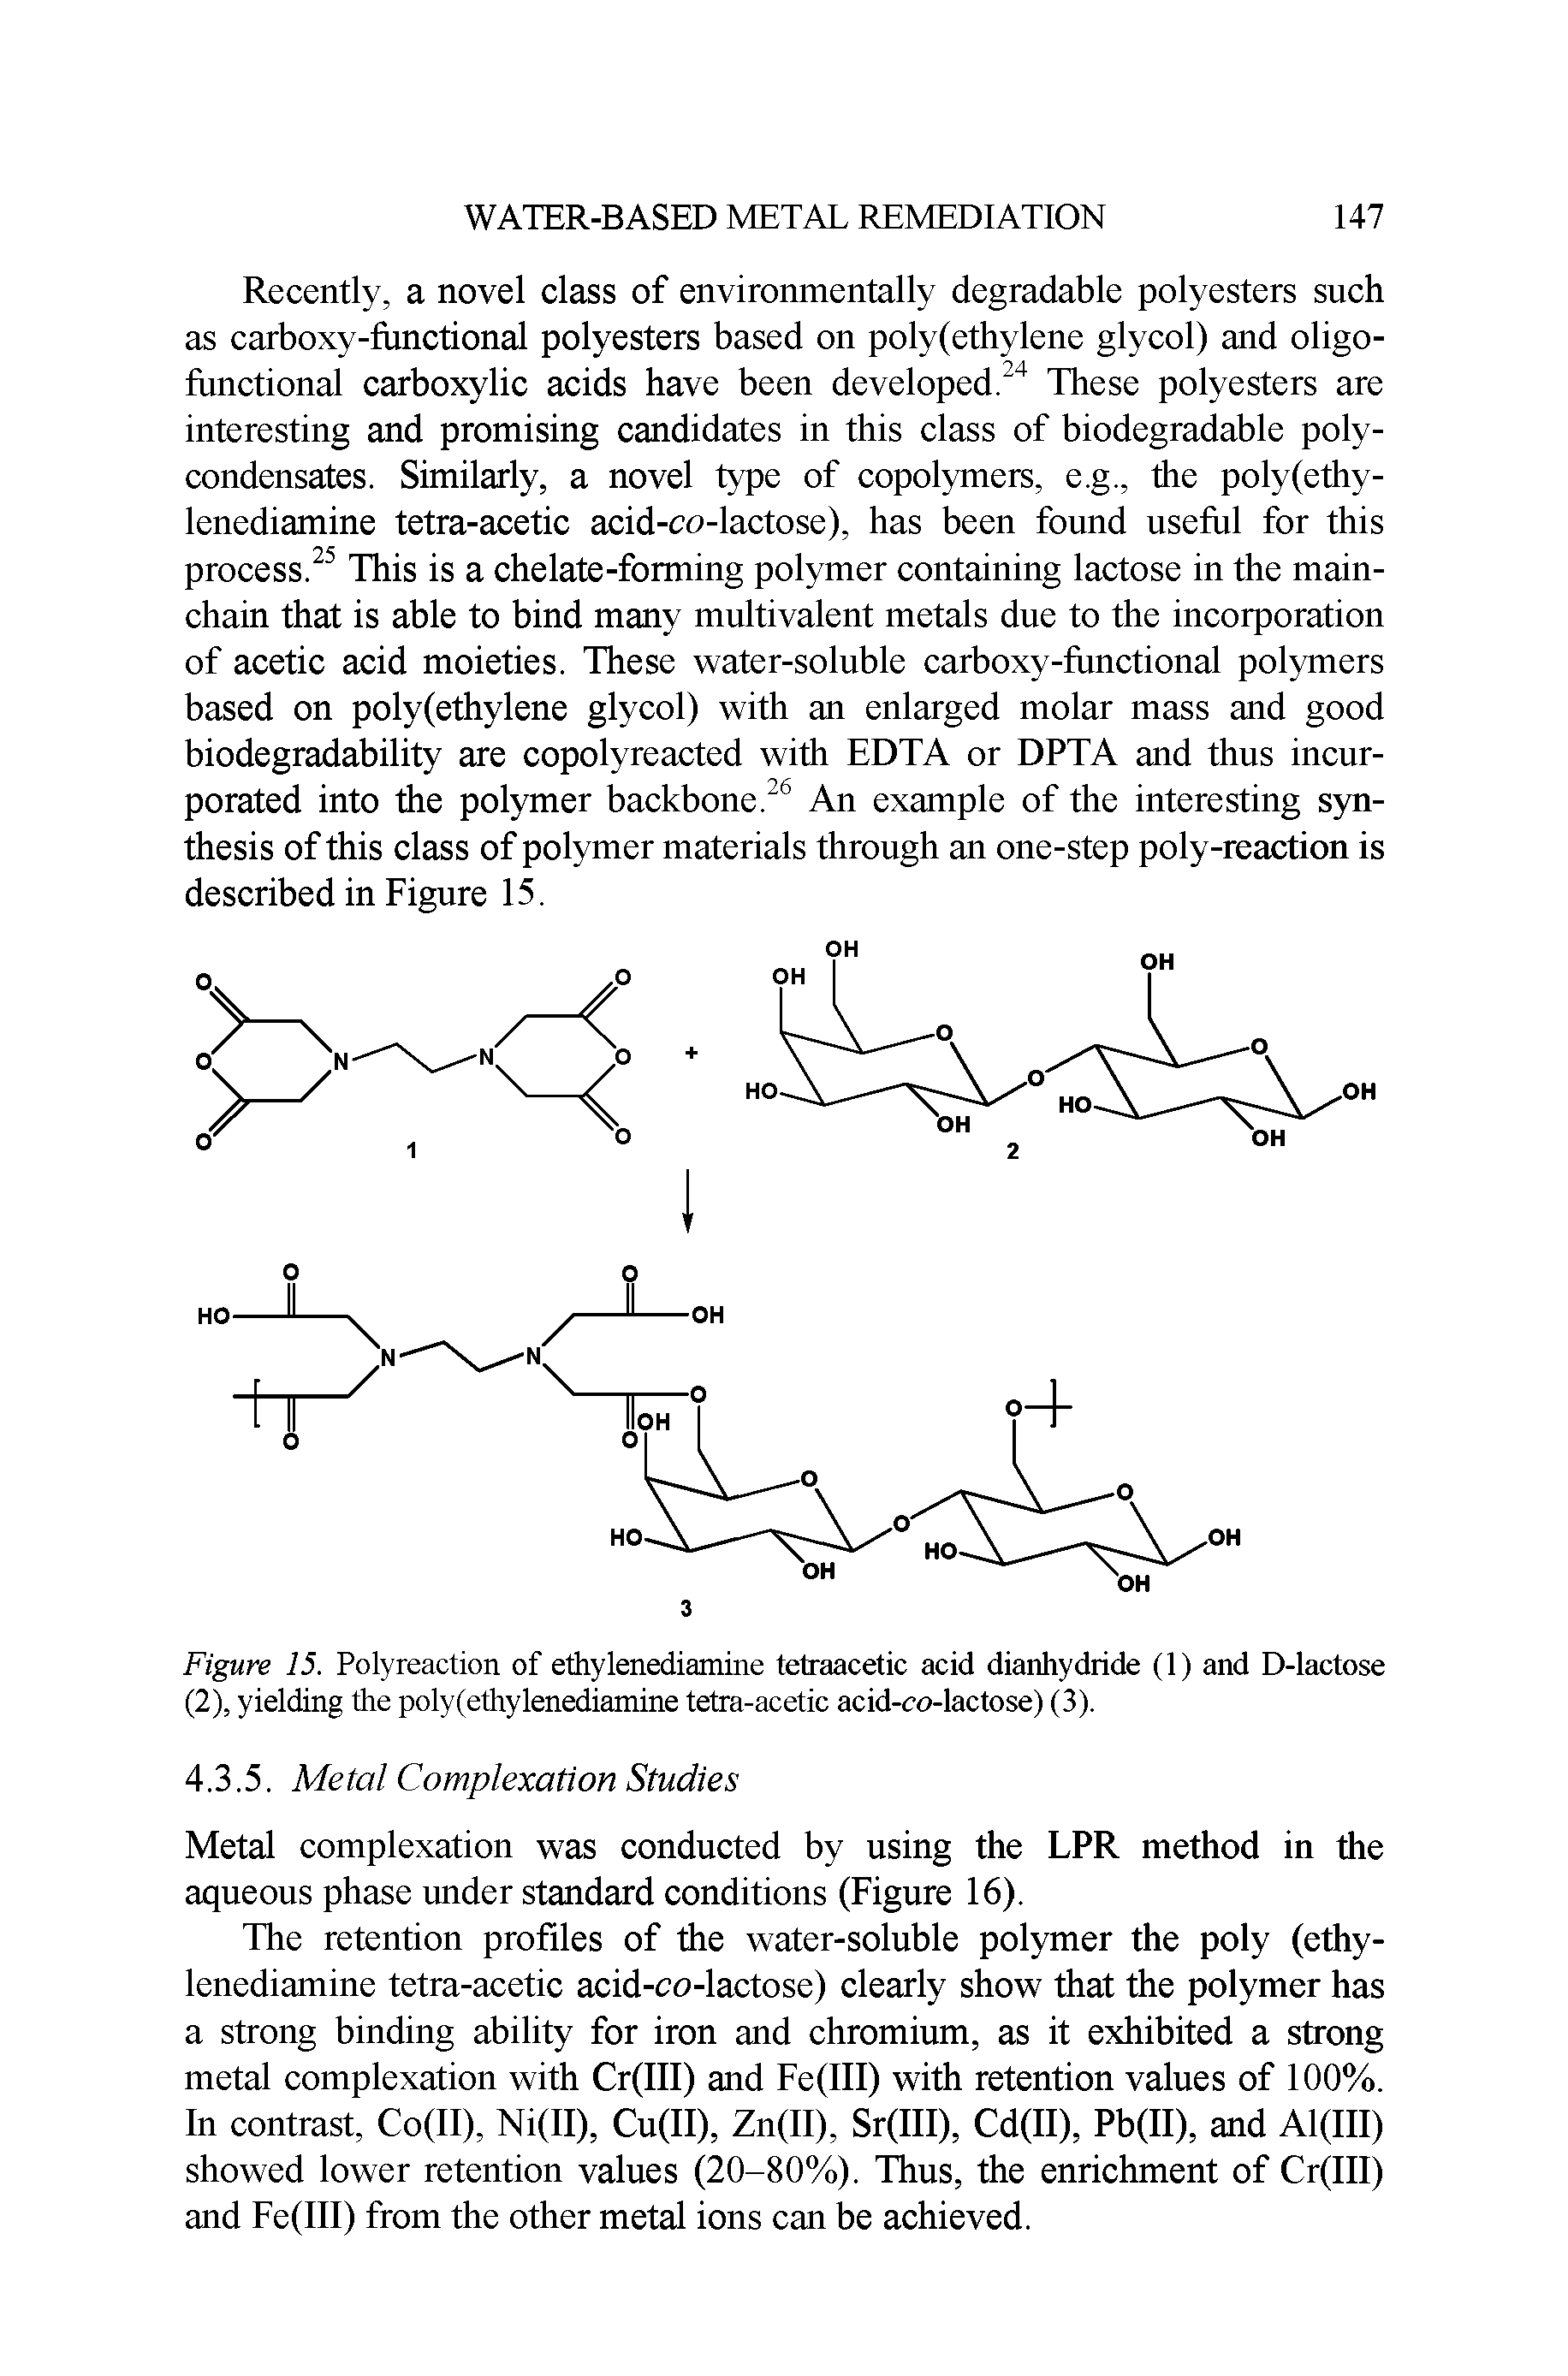 Figure 15. Polyreaction of ethylenediamine tetraacetic acid dianhydride (1) and D-lactose (2), yielding the poly(ethylenediamine tetra-acetic acid-co-lactose) (3).